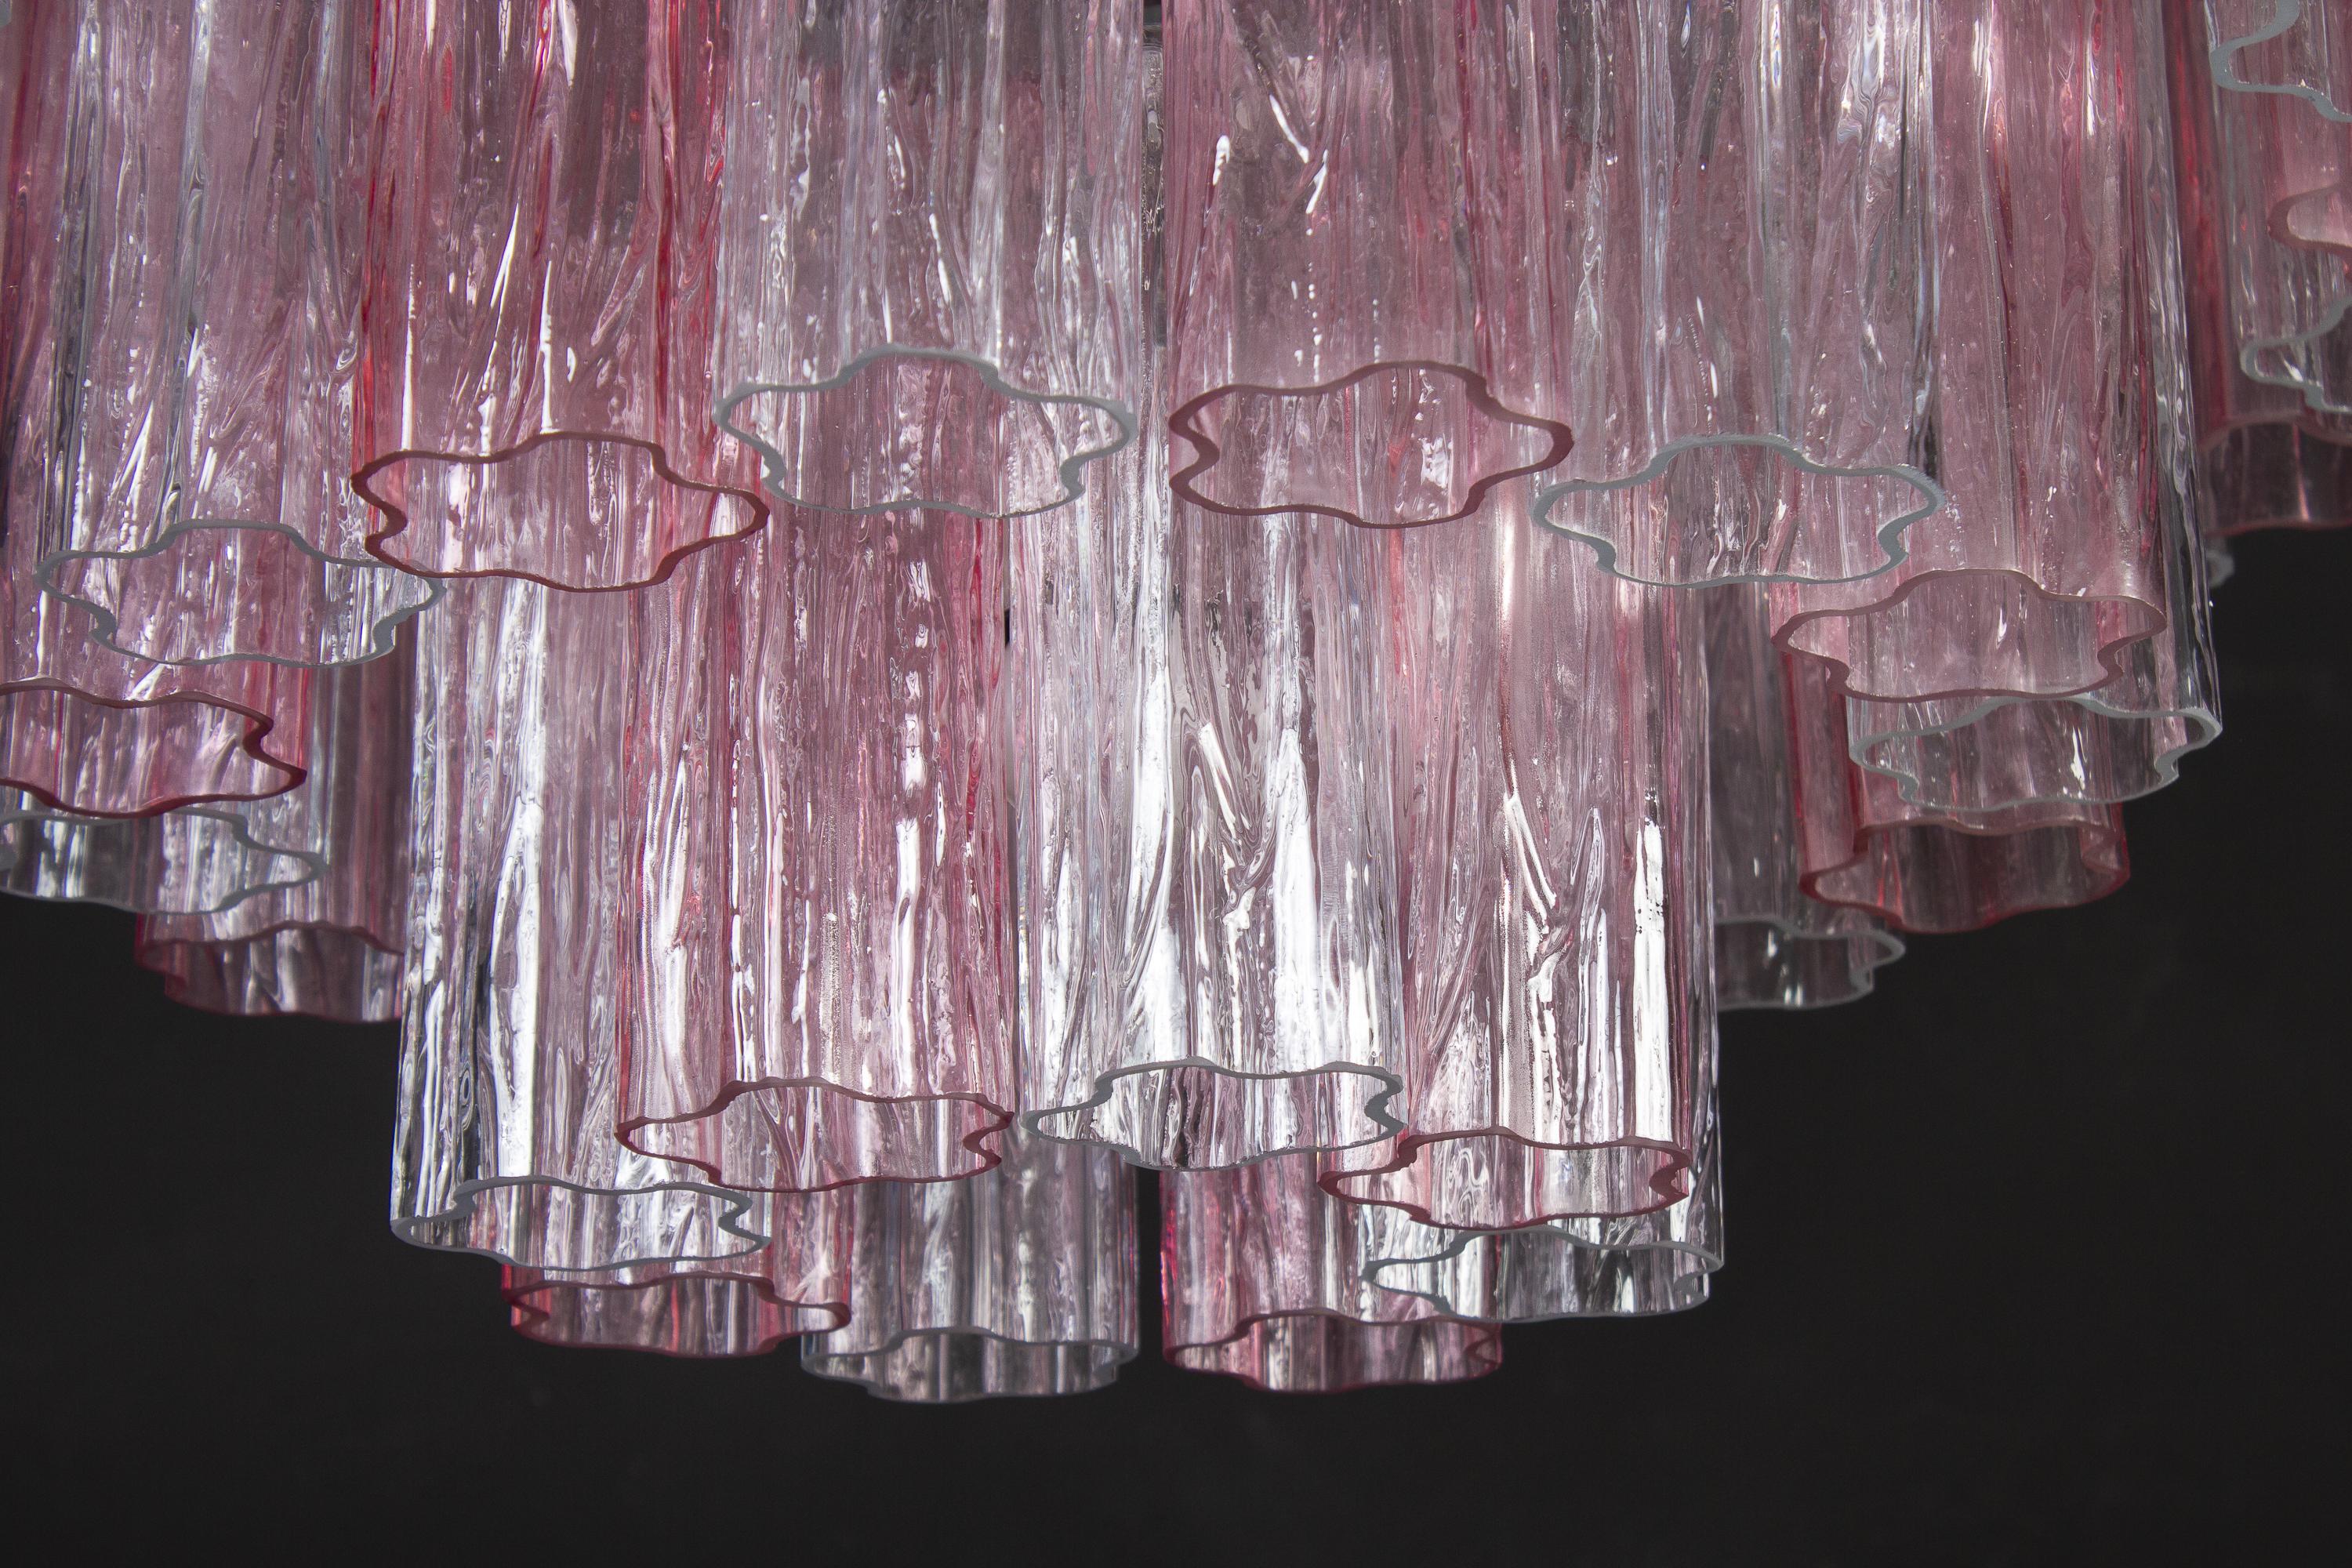 Pink and Ice Color Large Italian Murano Glass Tronchi Chandelier For Sale 4